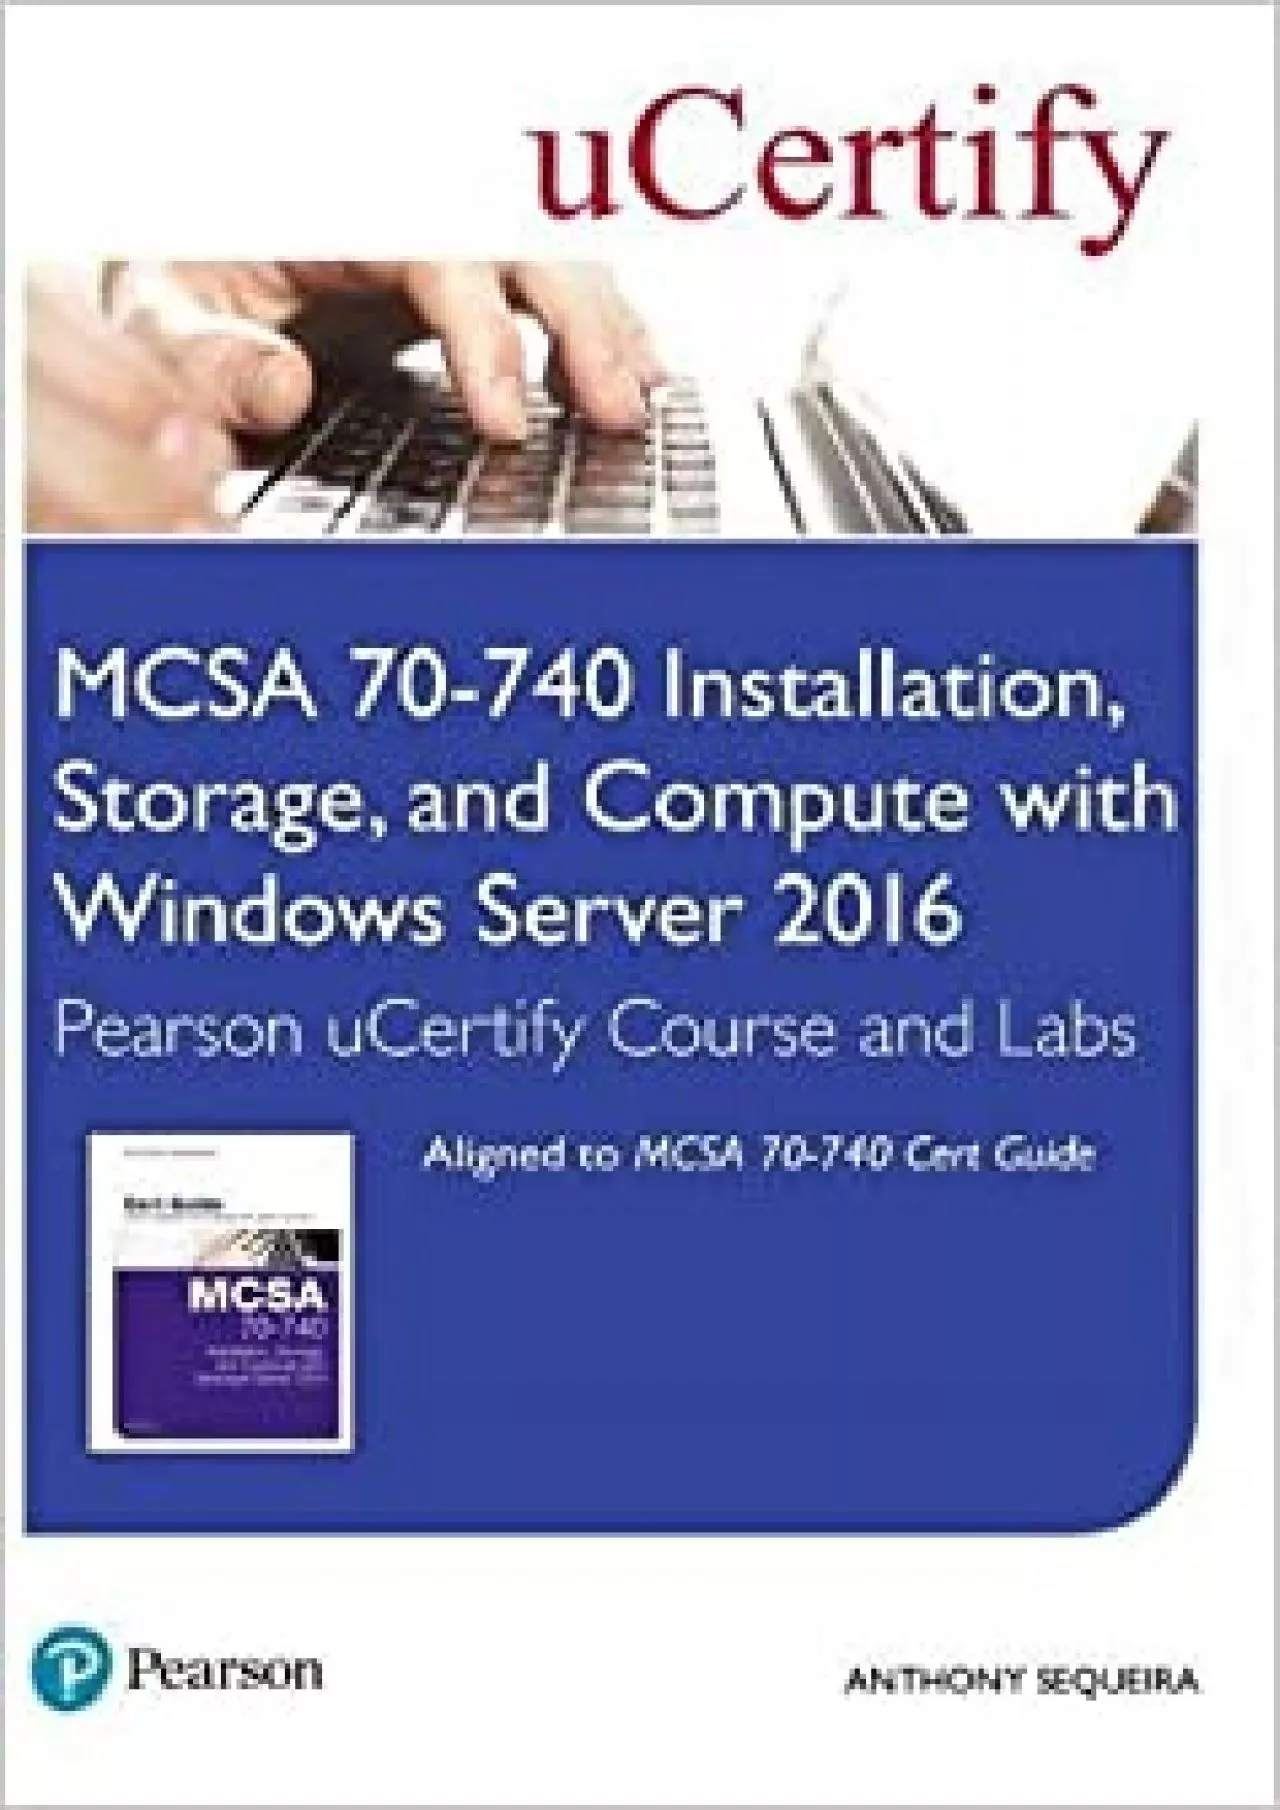 MCSA 70-740 Installation Storage and Compute with Windows Server 206 Pearson uCertify